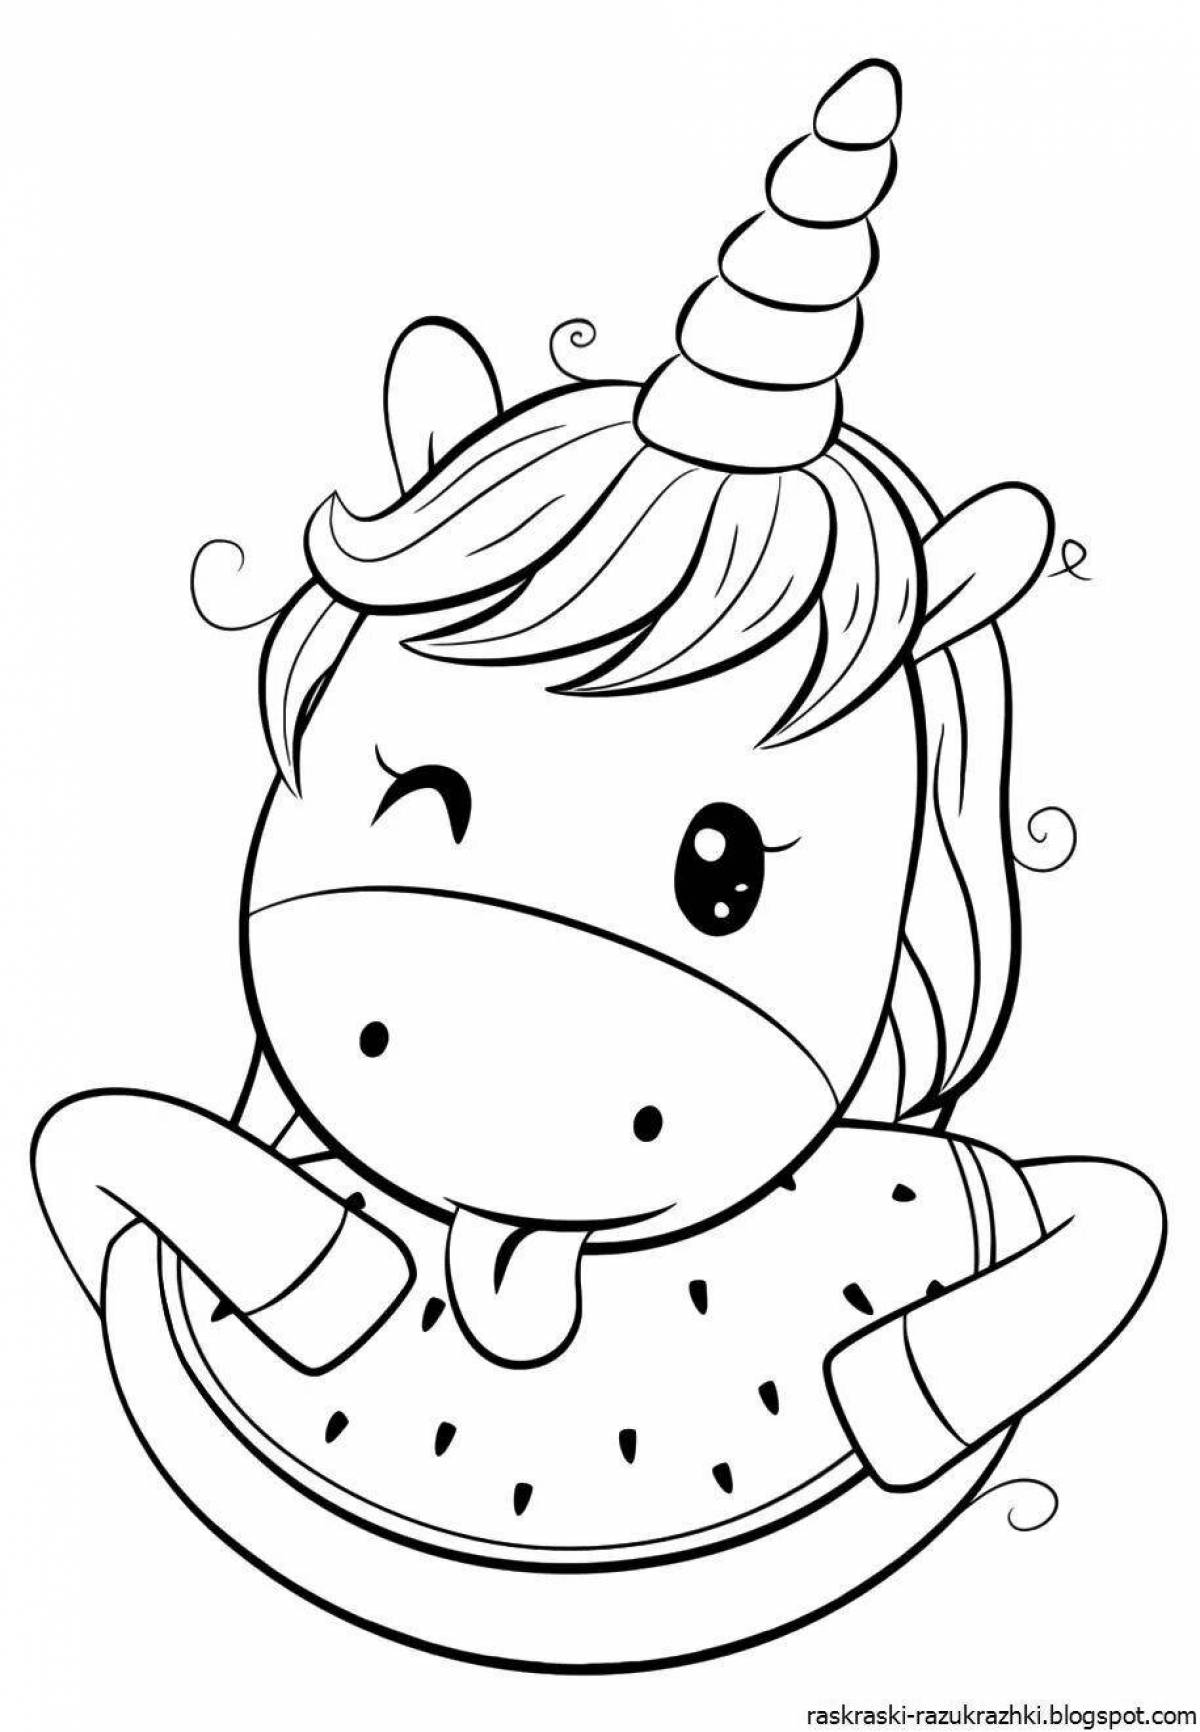 Blissful coloring for girls animals unicorn